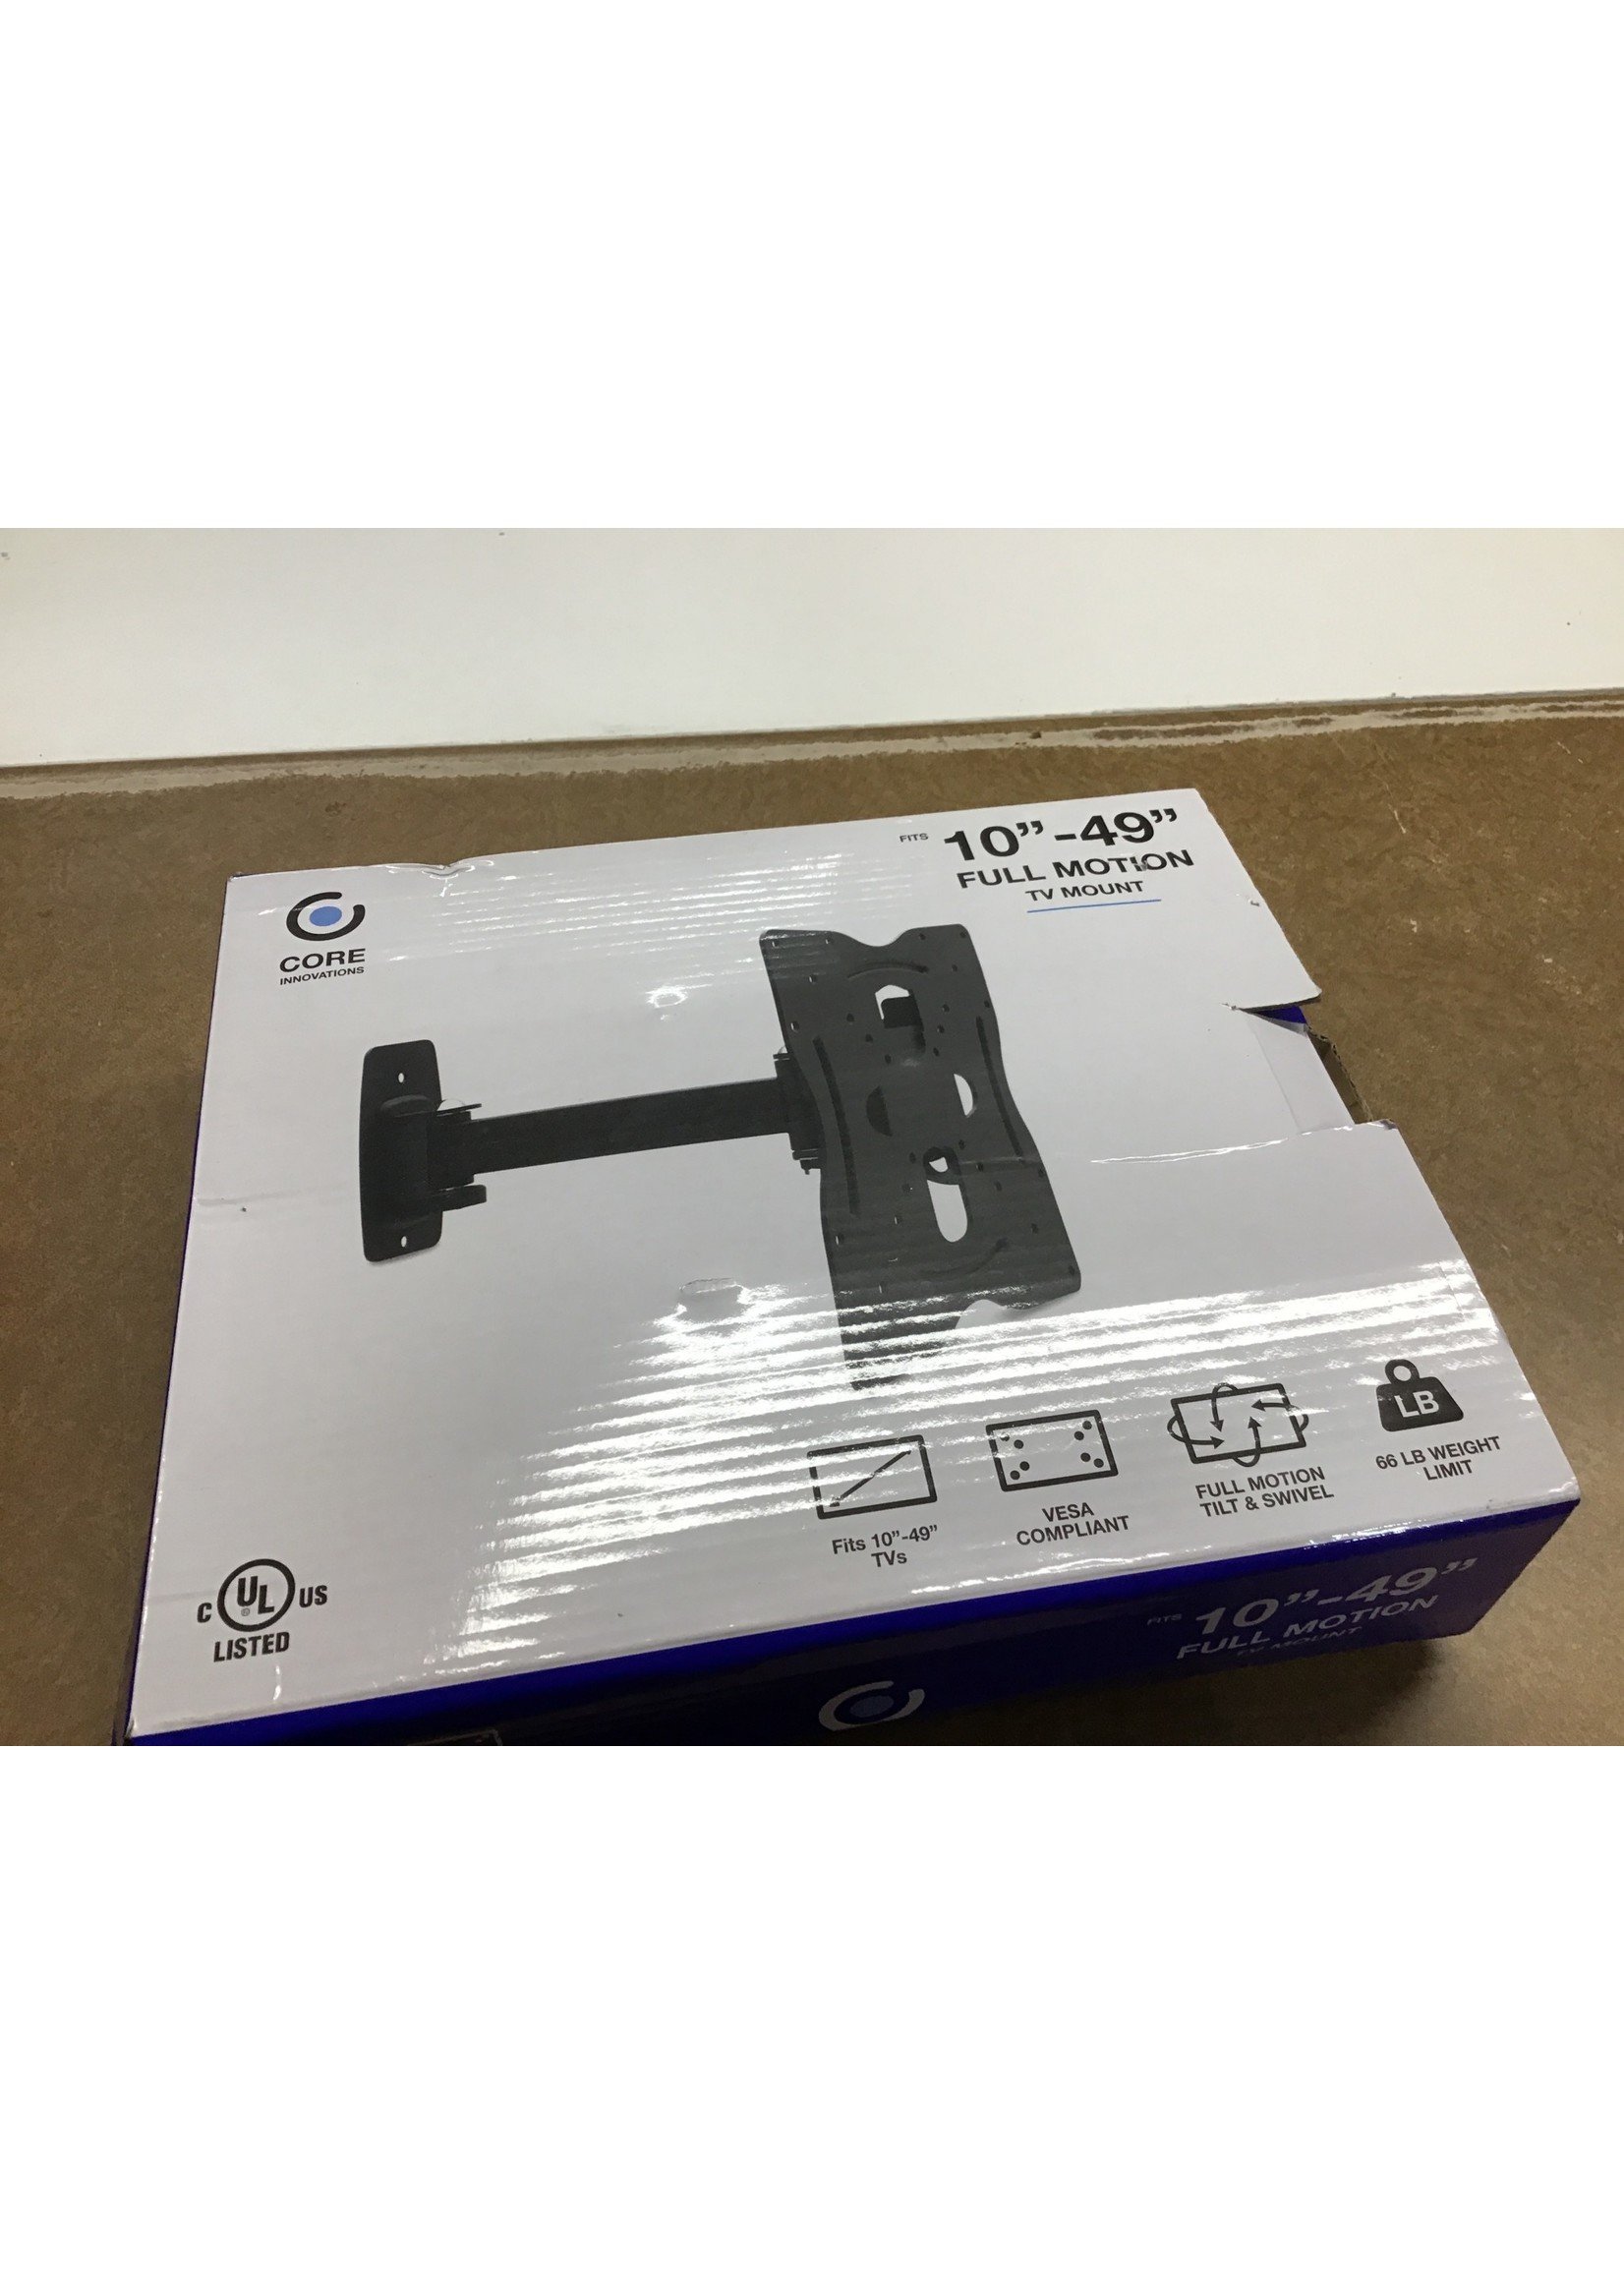 Core Innovations Full Motion TV Mount 10-49 *Opened/Damage to Box